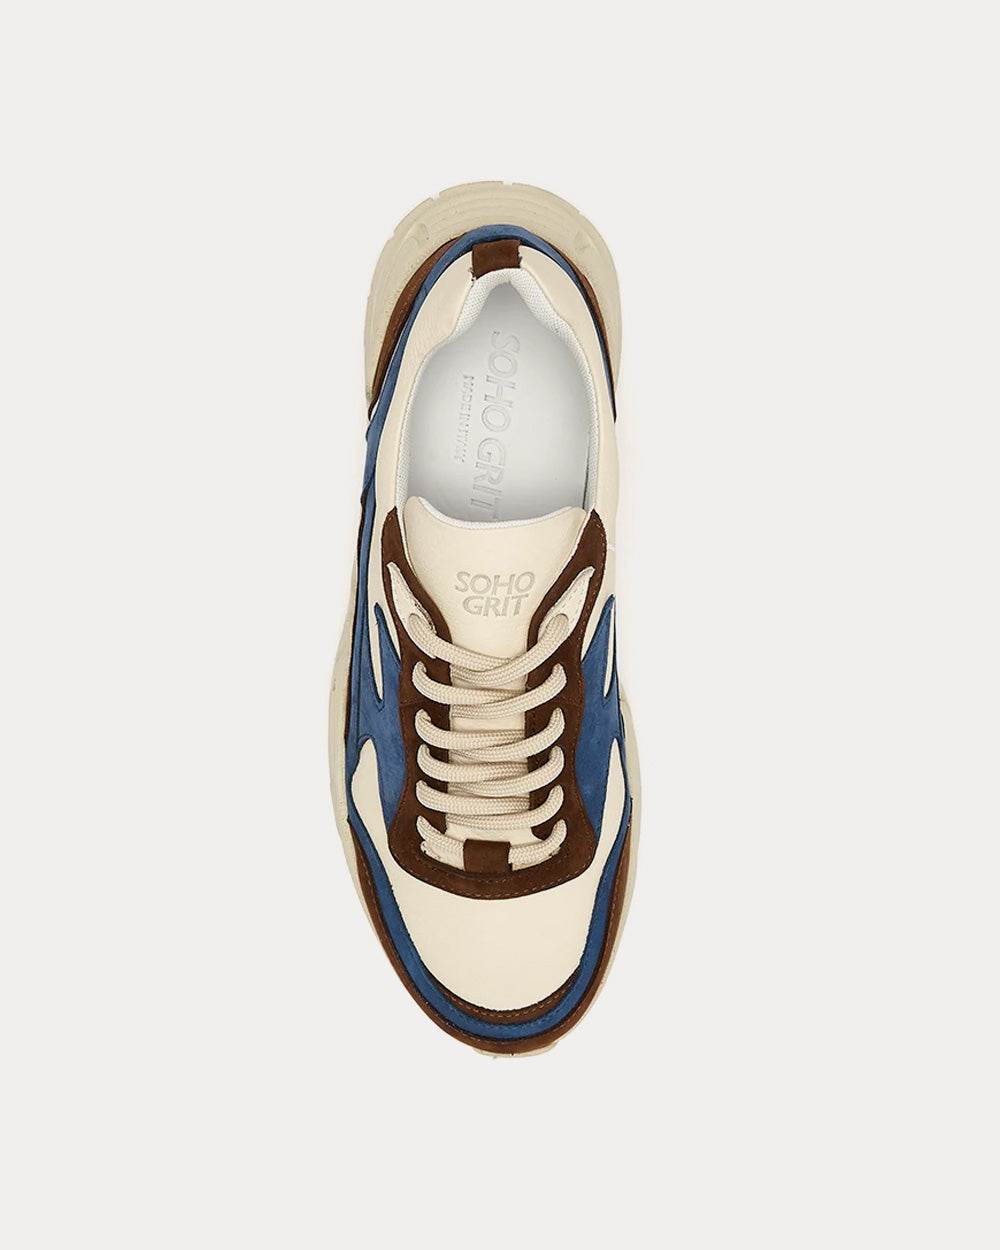 Soho Grit - The Hollen Brown Blue Off-White Low Top Sneakers